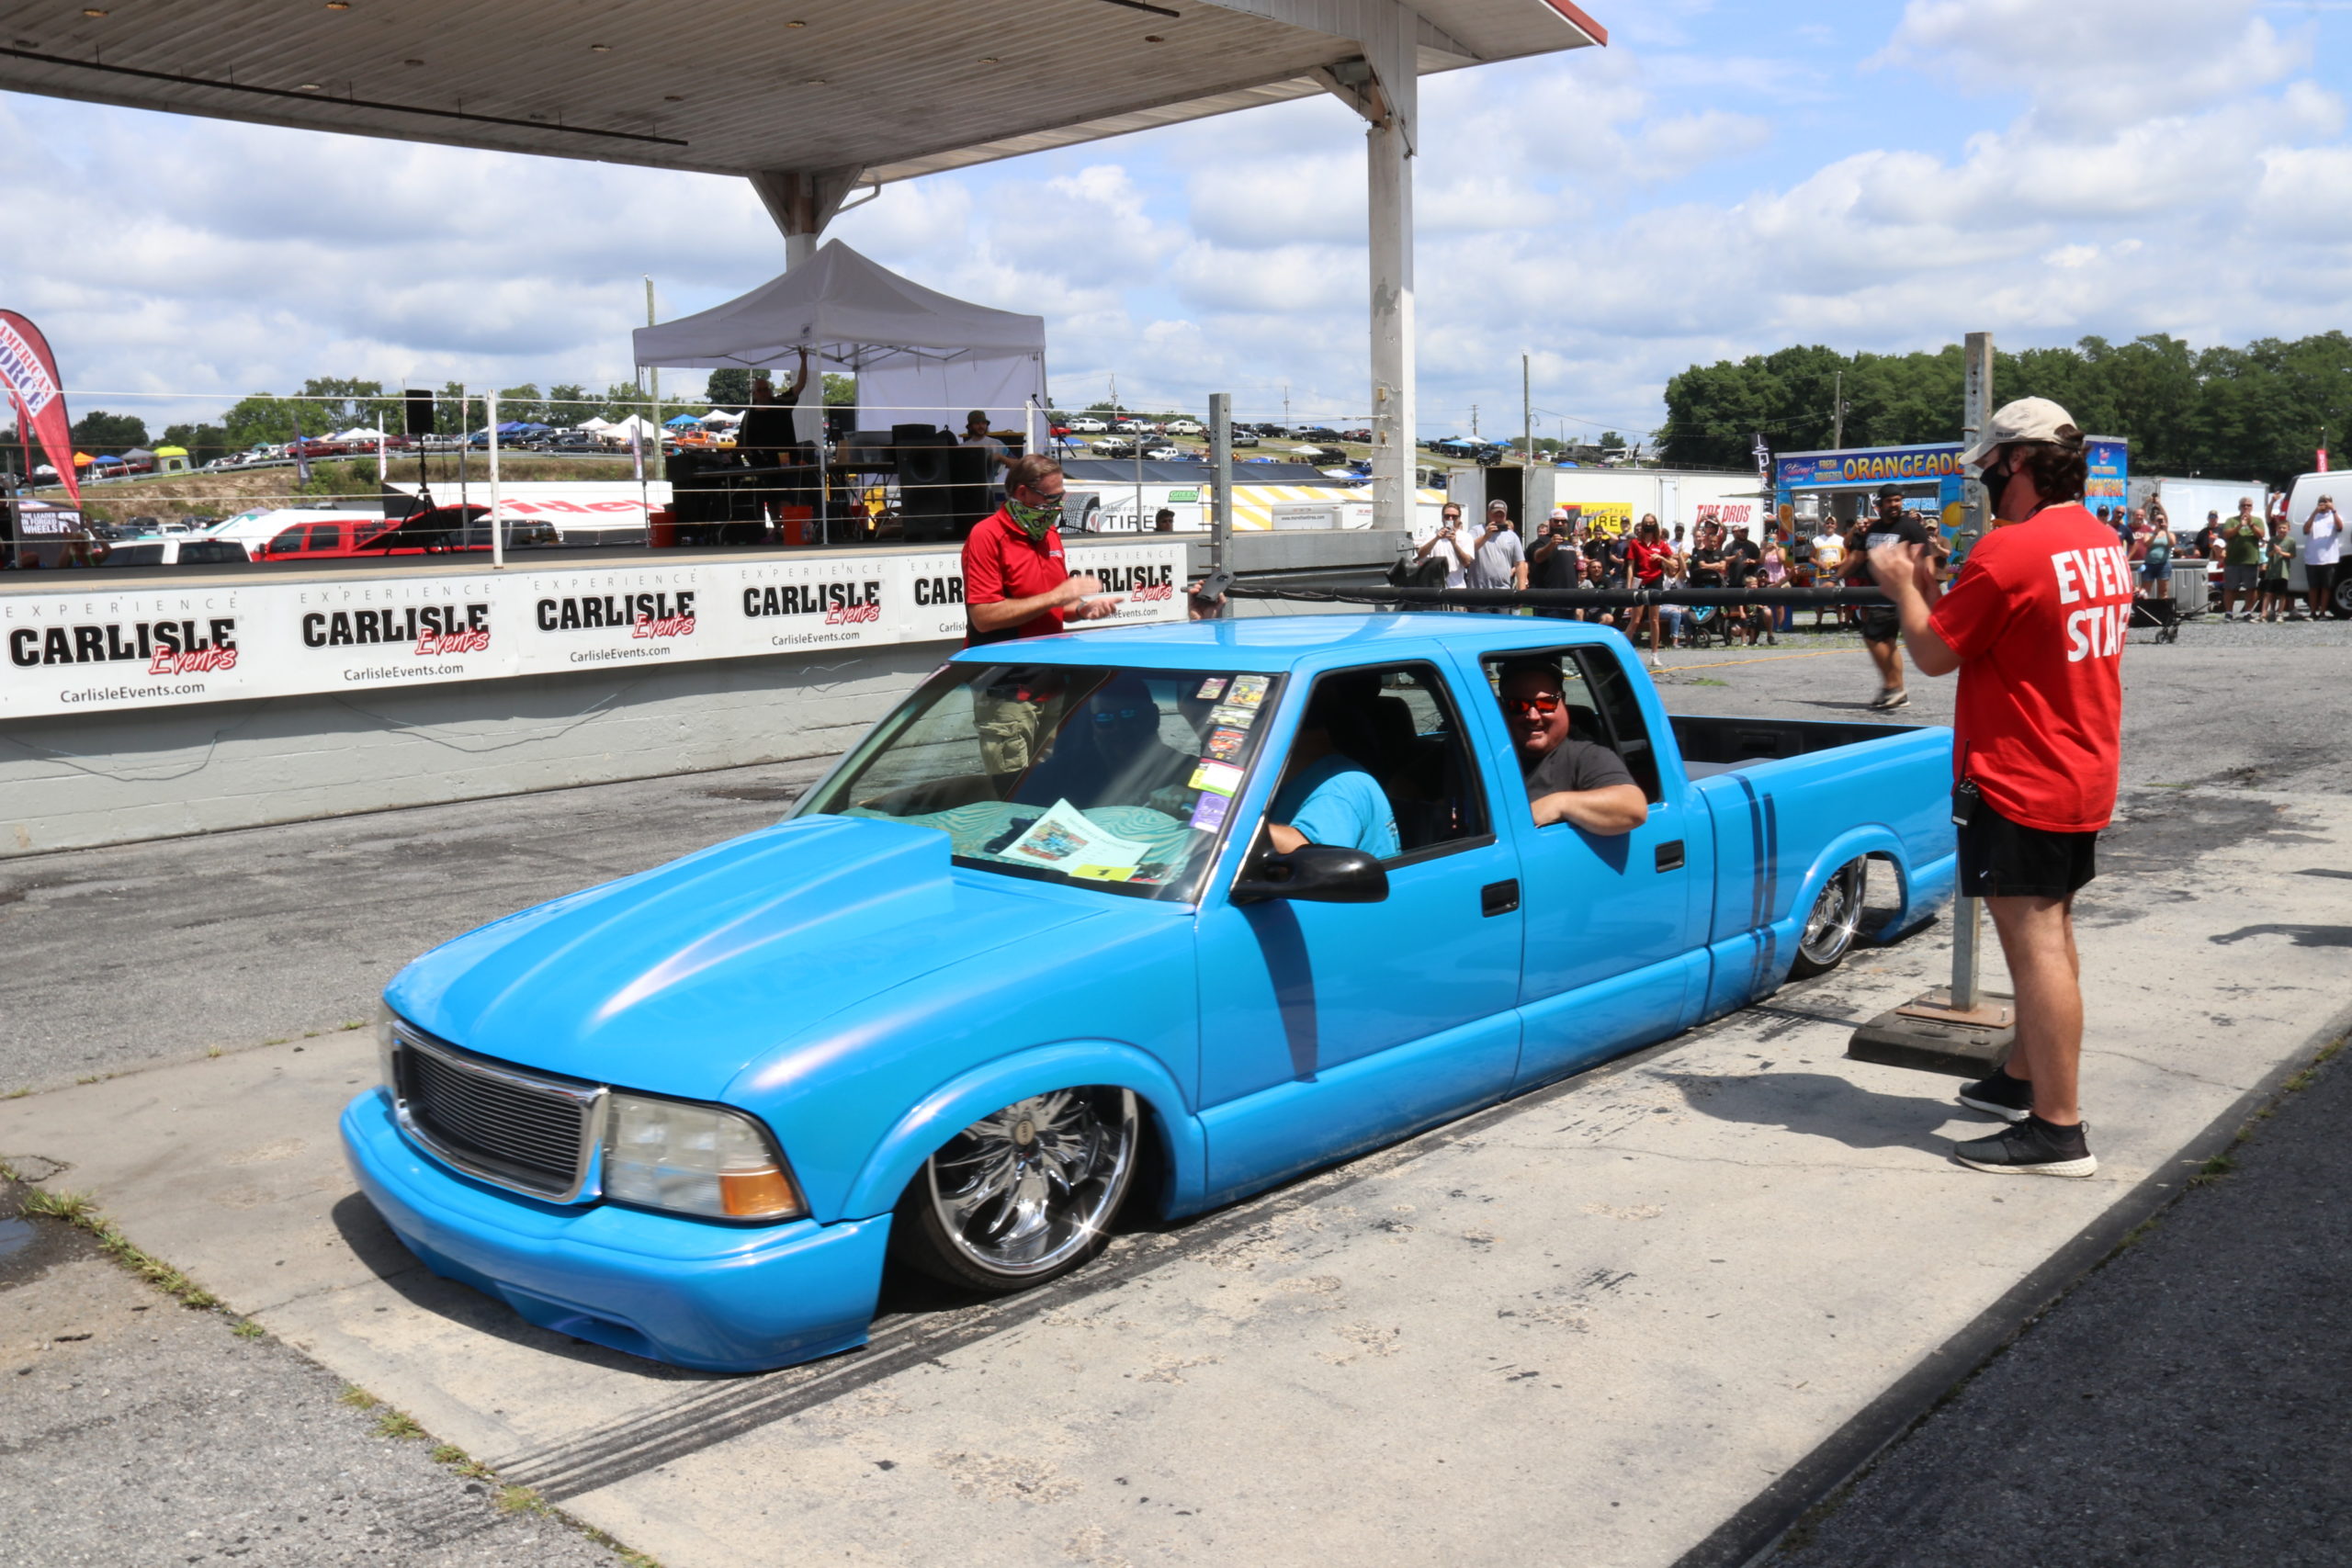 Carlisle Events Hosting Lowered Truck Show in 2021 | THE SHOP